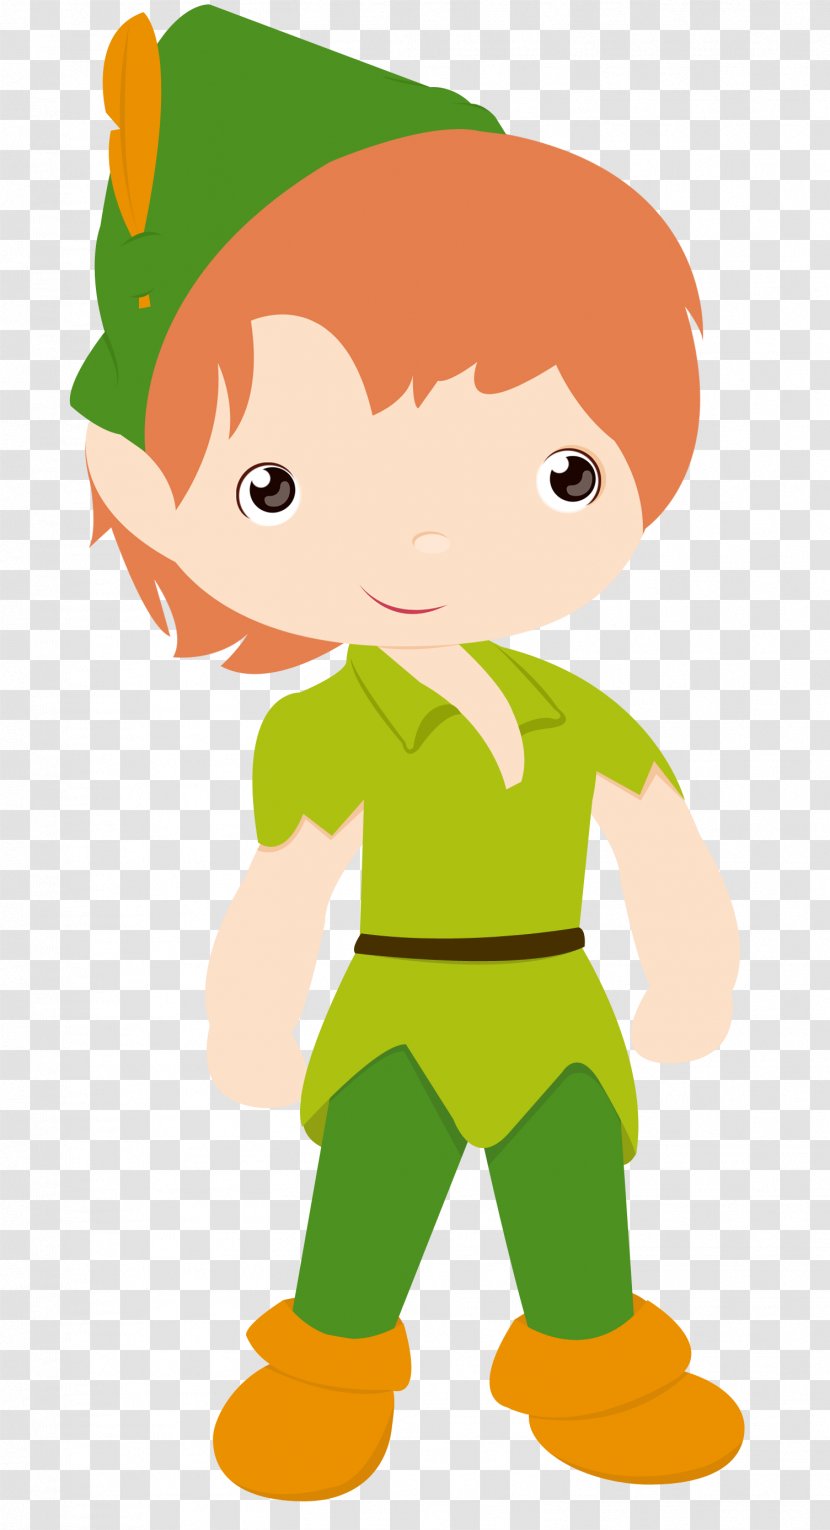 Peter Pan Tinker Bell Captain Hook Wendy Darling Clip Art - Jake And The Never Land Pirates Transparent PNG